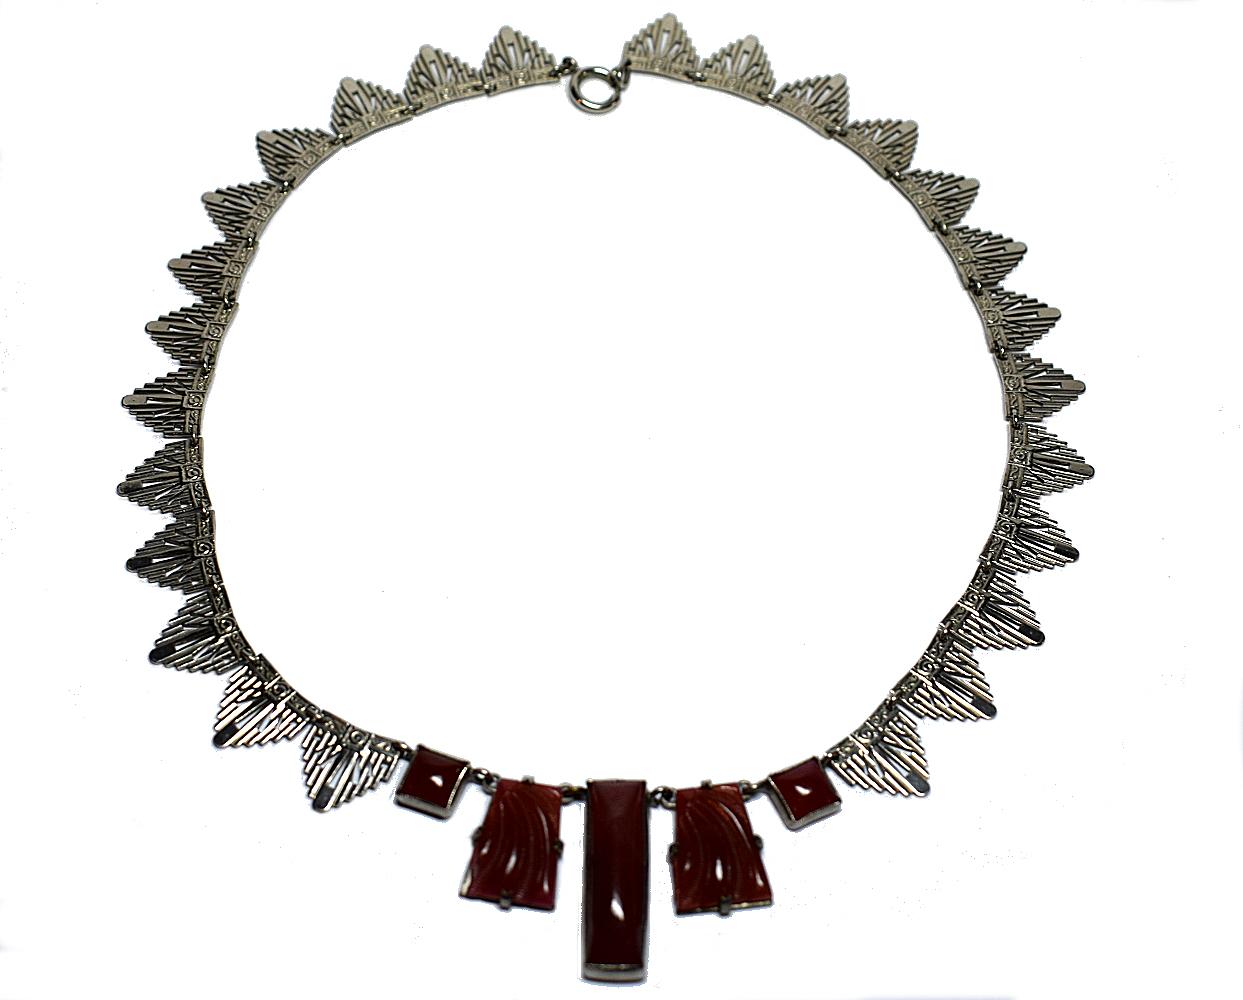 Very attractive ladies Art Deco necklace, totally authentic and to the period, dating to the 1930s. Features fretted out white metal segments which give the feel of skyscrapers in form. Central to the necklace hanging to the nape of the neck are